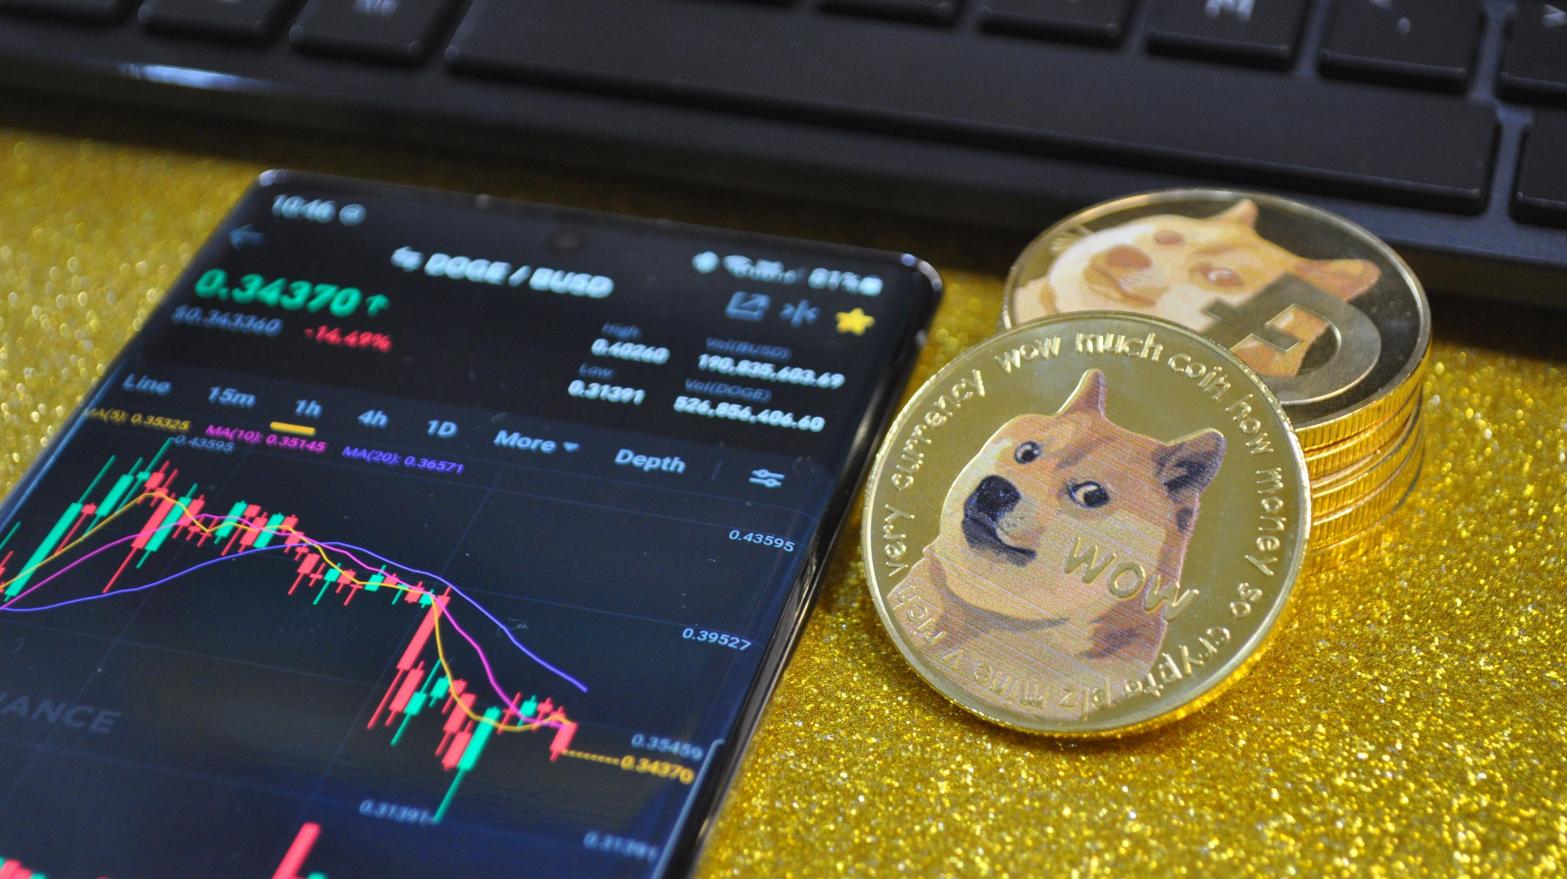 After Elon Musk called Dogecoin 'a hustle' on live TV, the price of DOGE plummted, and it has never truly recovered despite jumps in price thanks in part to Musk's antics. (Image: Pro Aerial Master, Shutterstock)